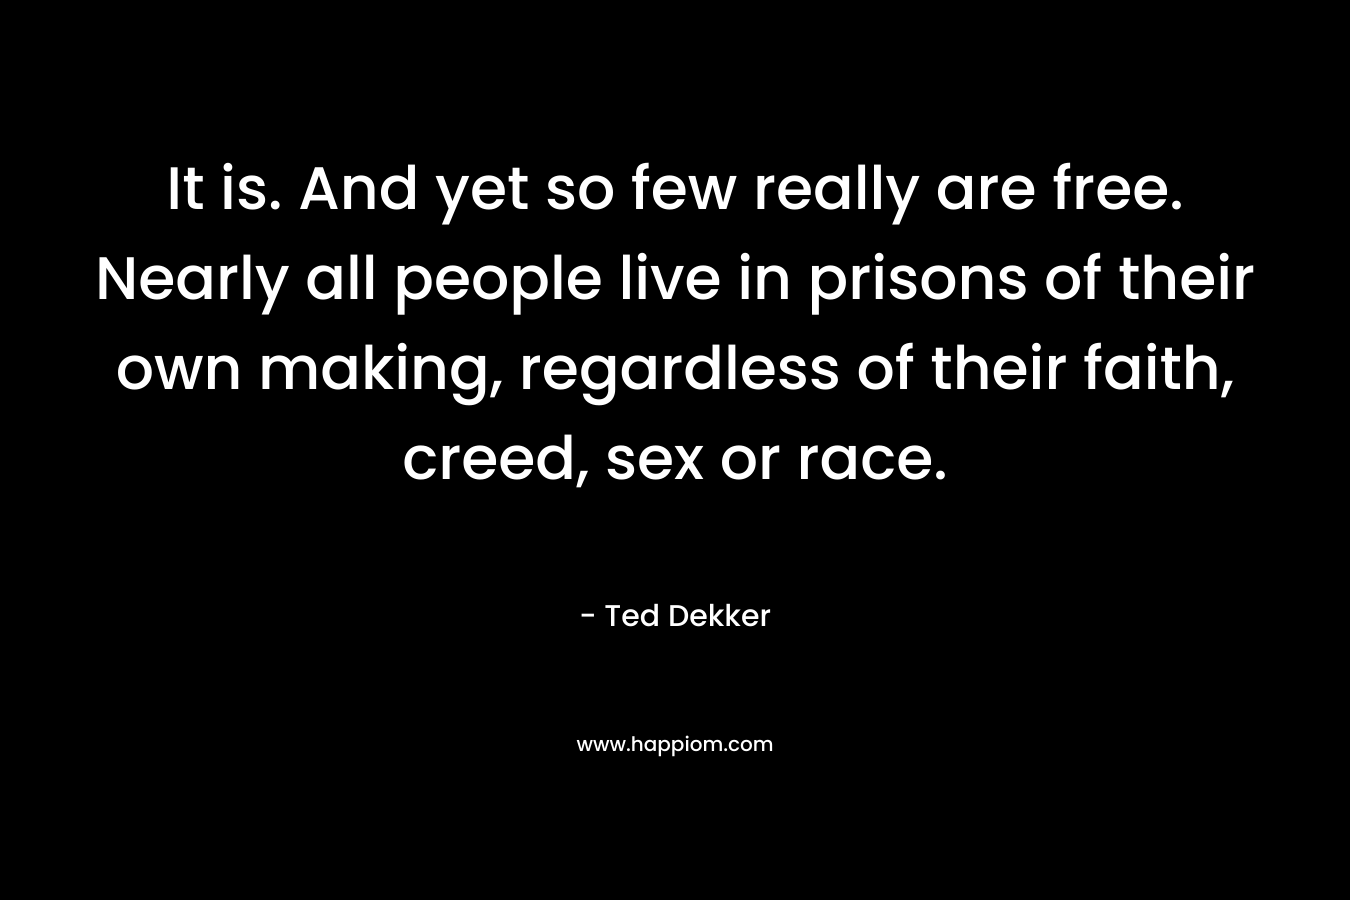 It is. And yet so few really are free. Nearly all people live in prisons of their own making, regardless of their faith, creed, sex or race. – Ted Dekker